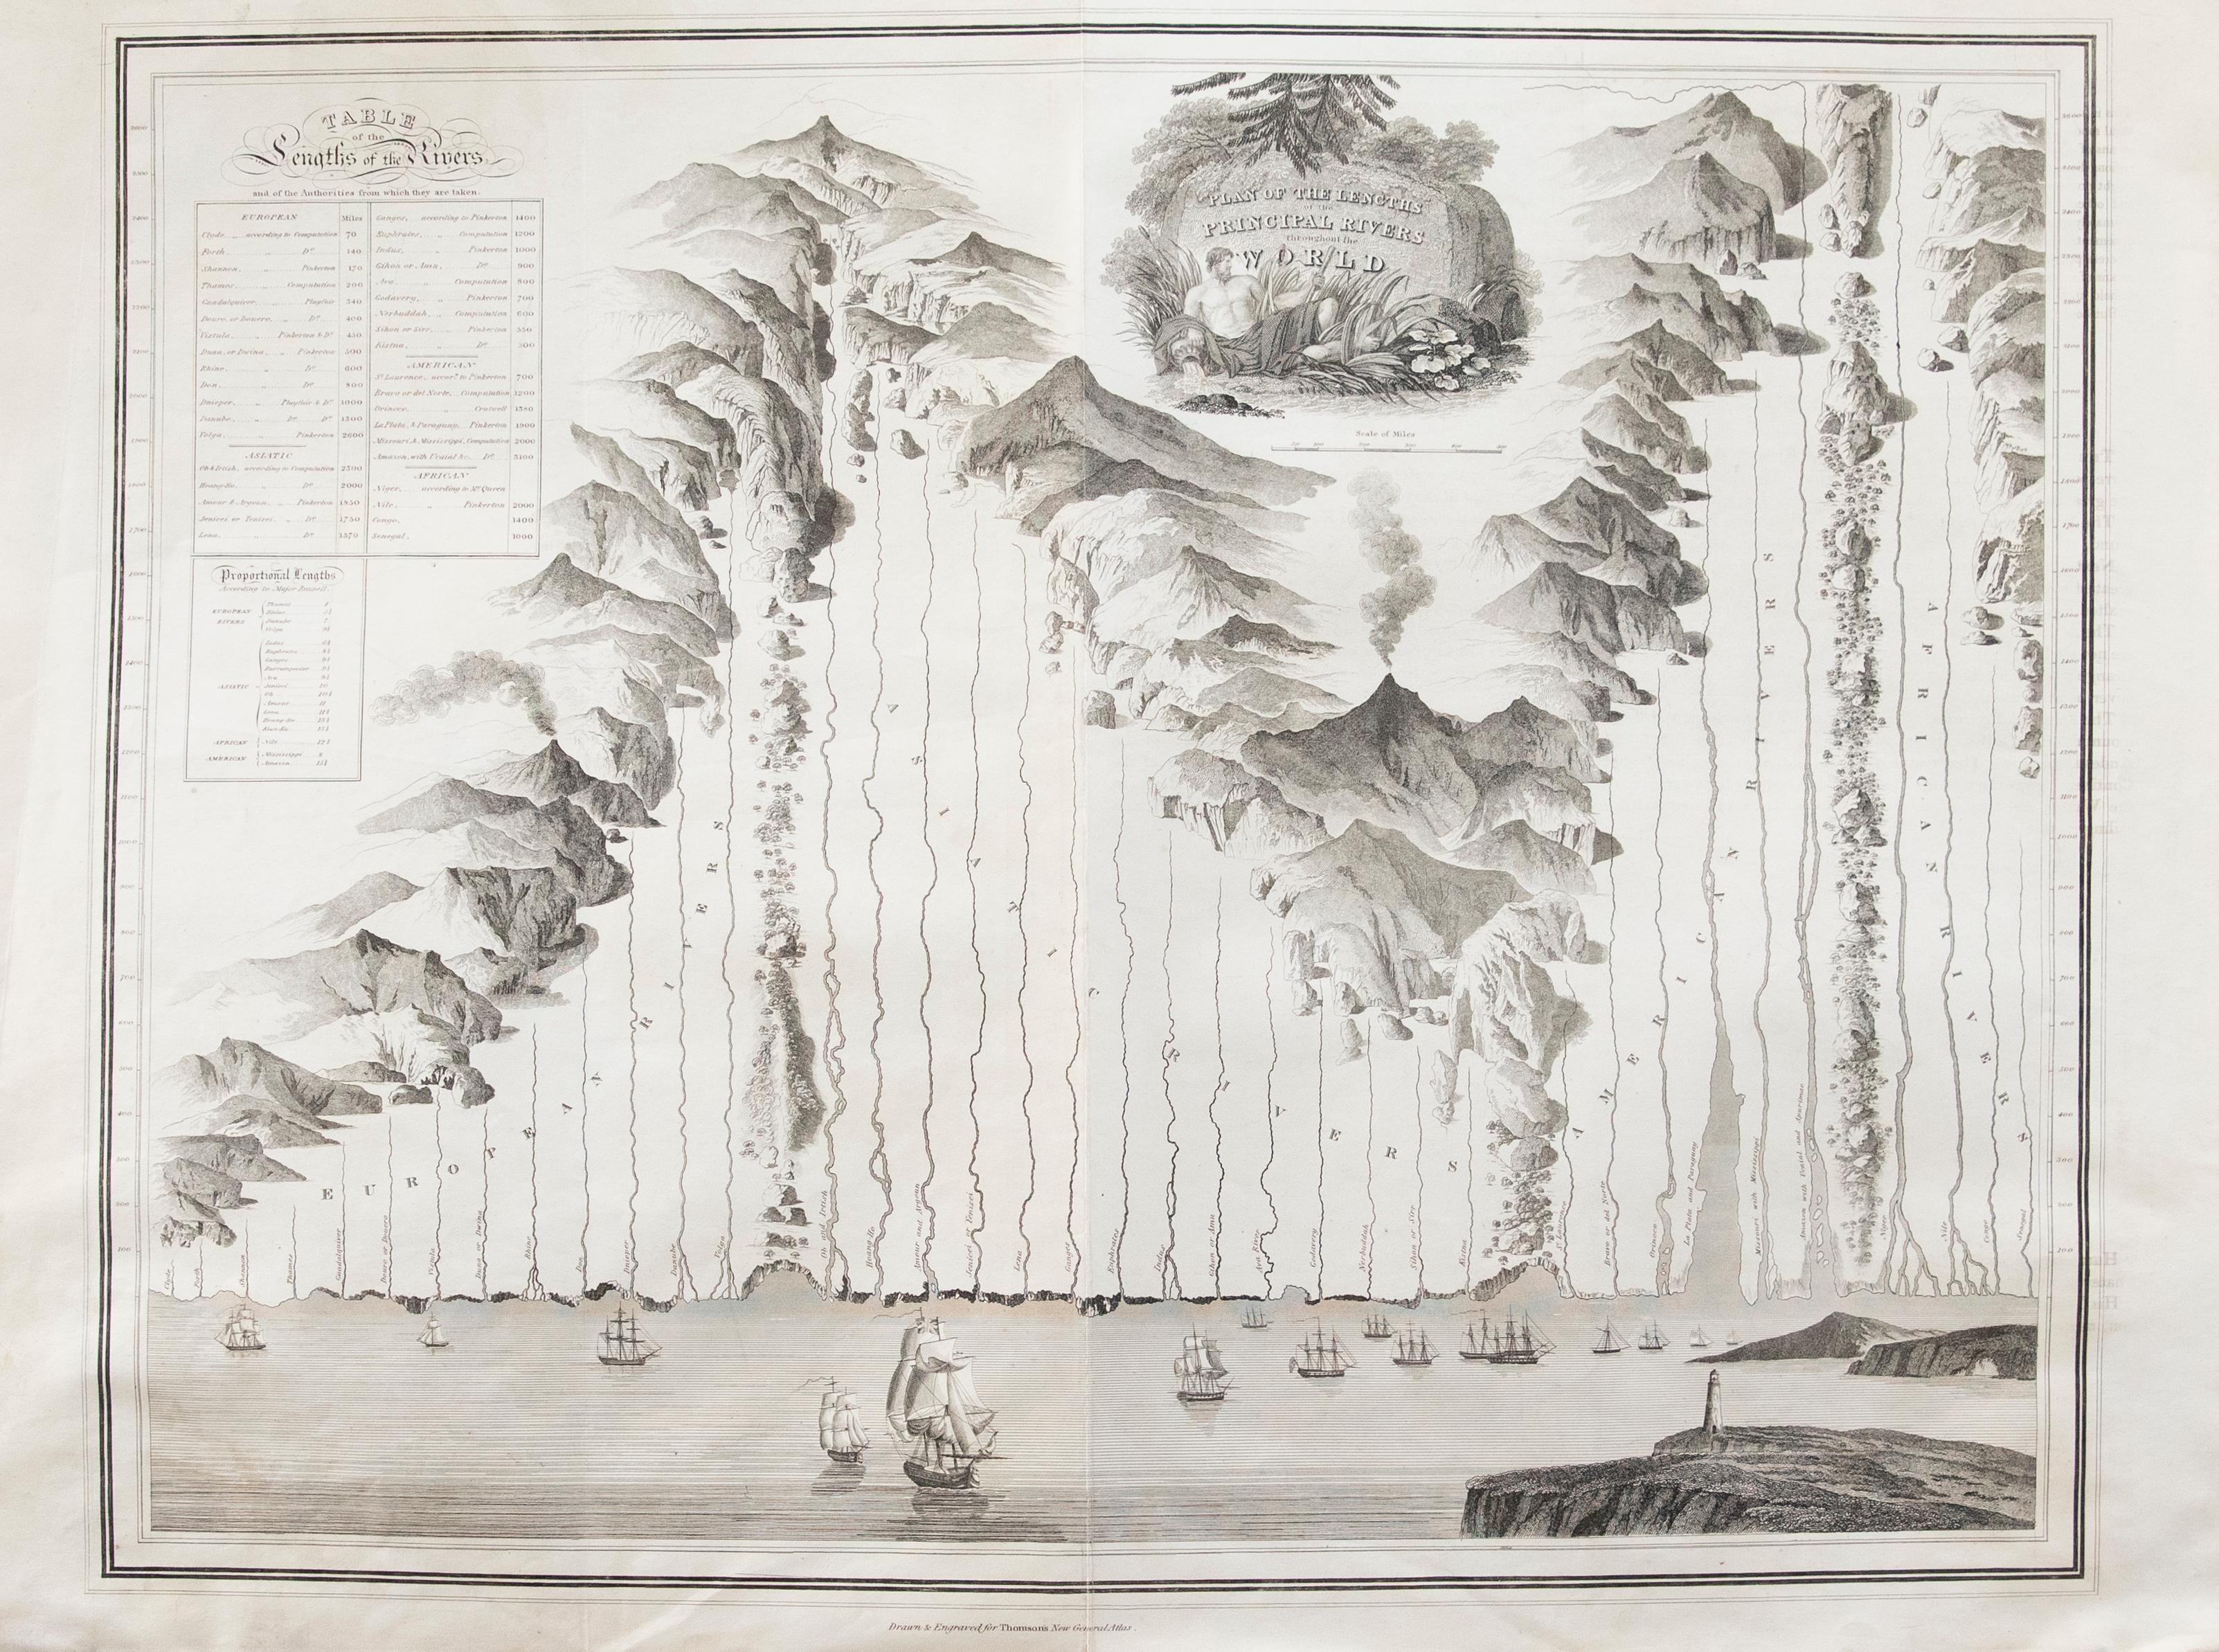 A fine engraved chart table showing the lengths of the principal rivers across the world, from the second edition of John Thomson's 'New General Atlas' published in 1830. On paper.